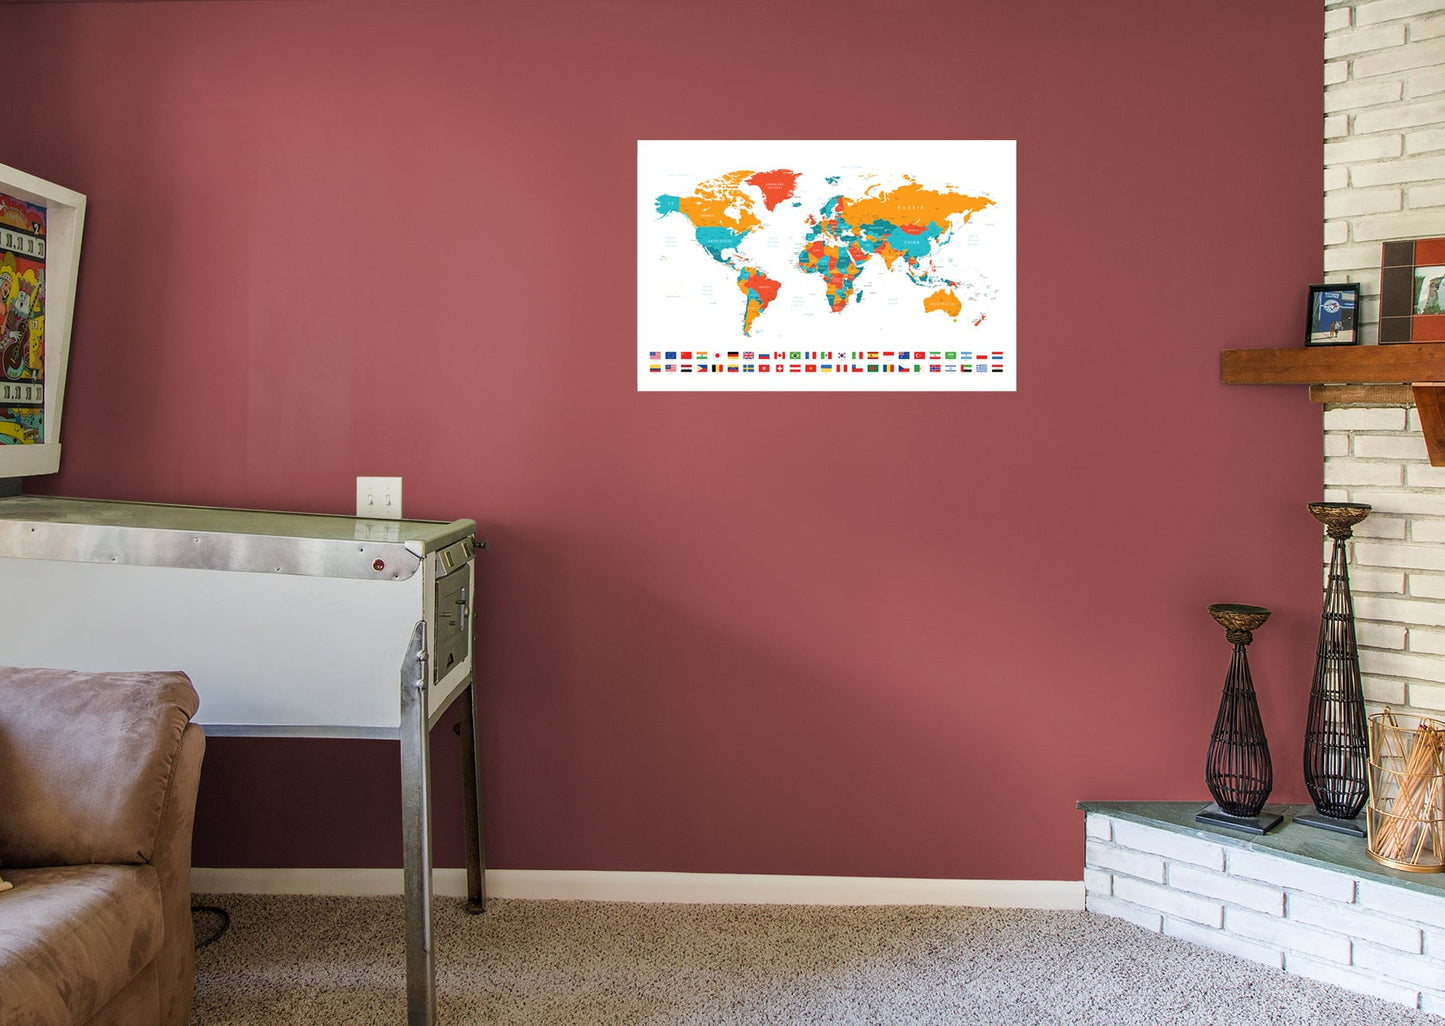 World Maps:  Colored Map and Flags        -   Removable Wall   Adhesive Decal